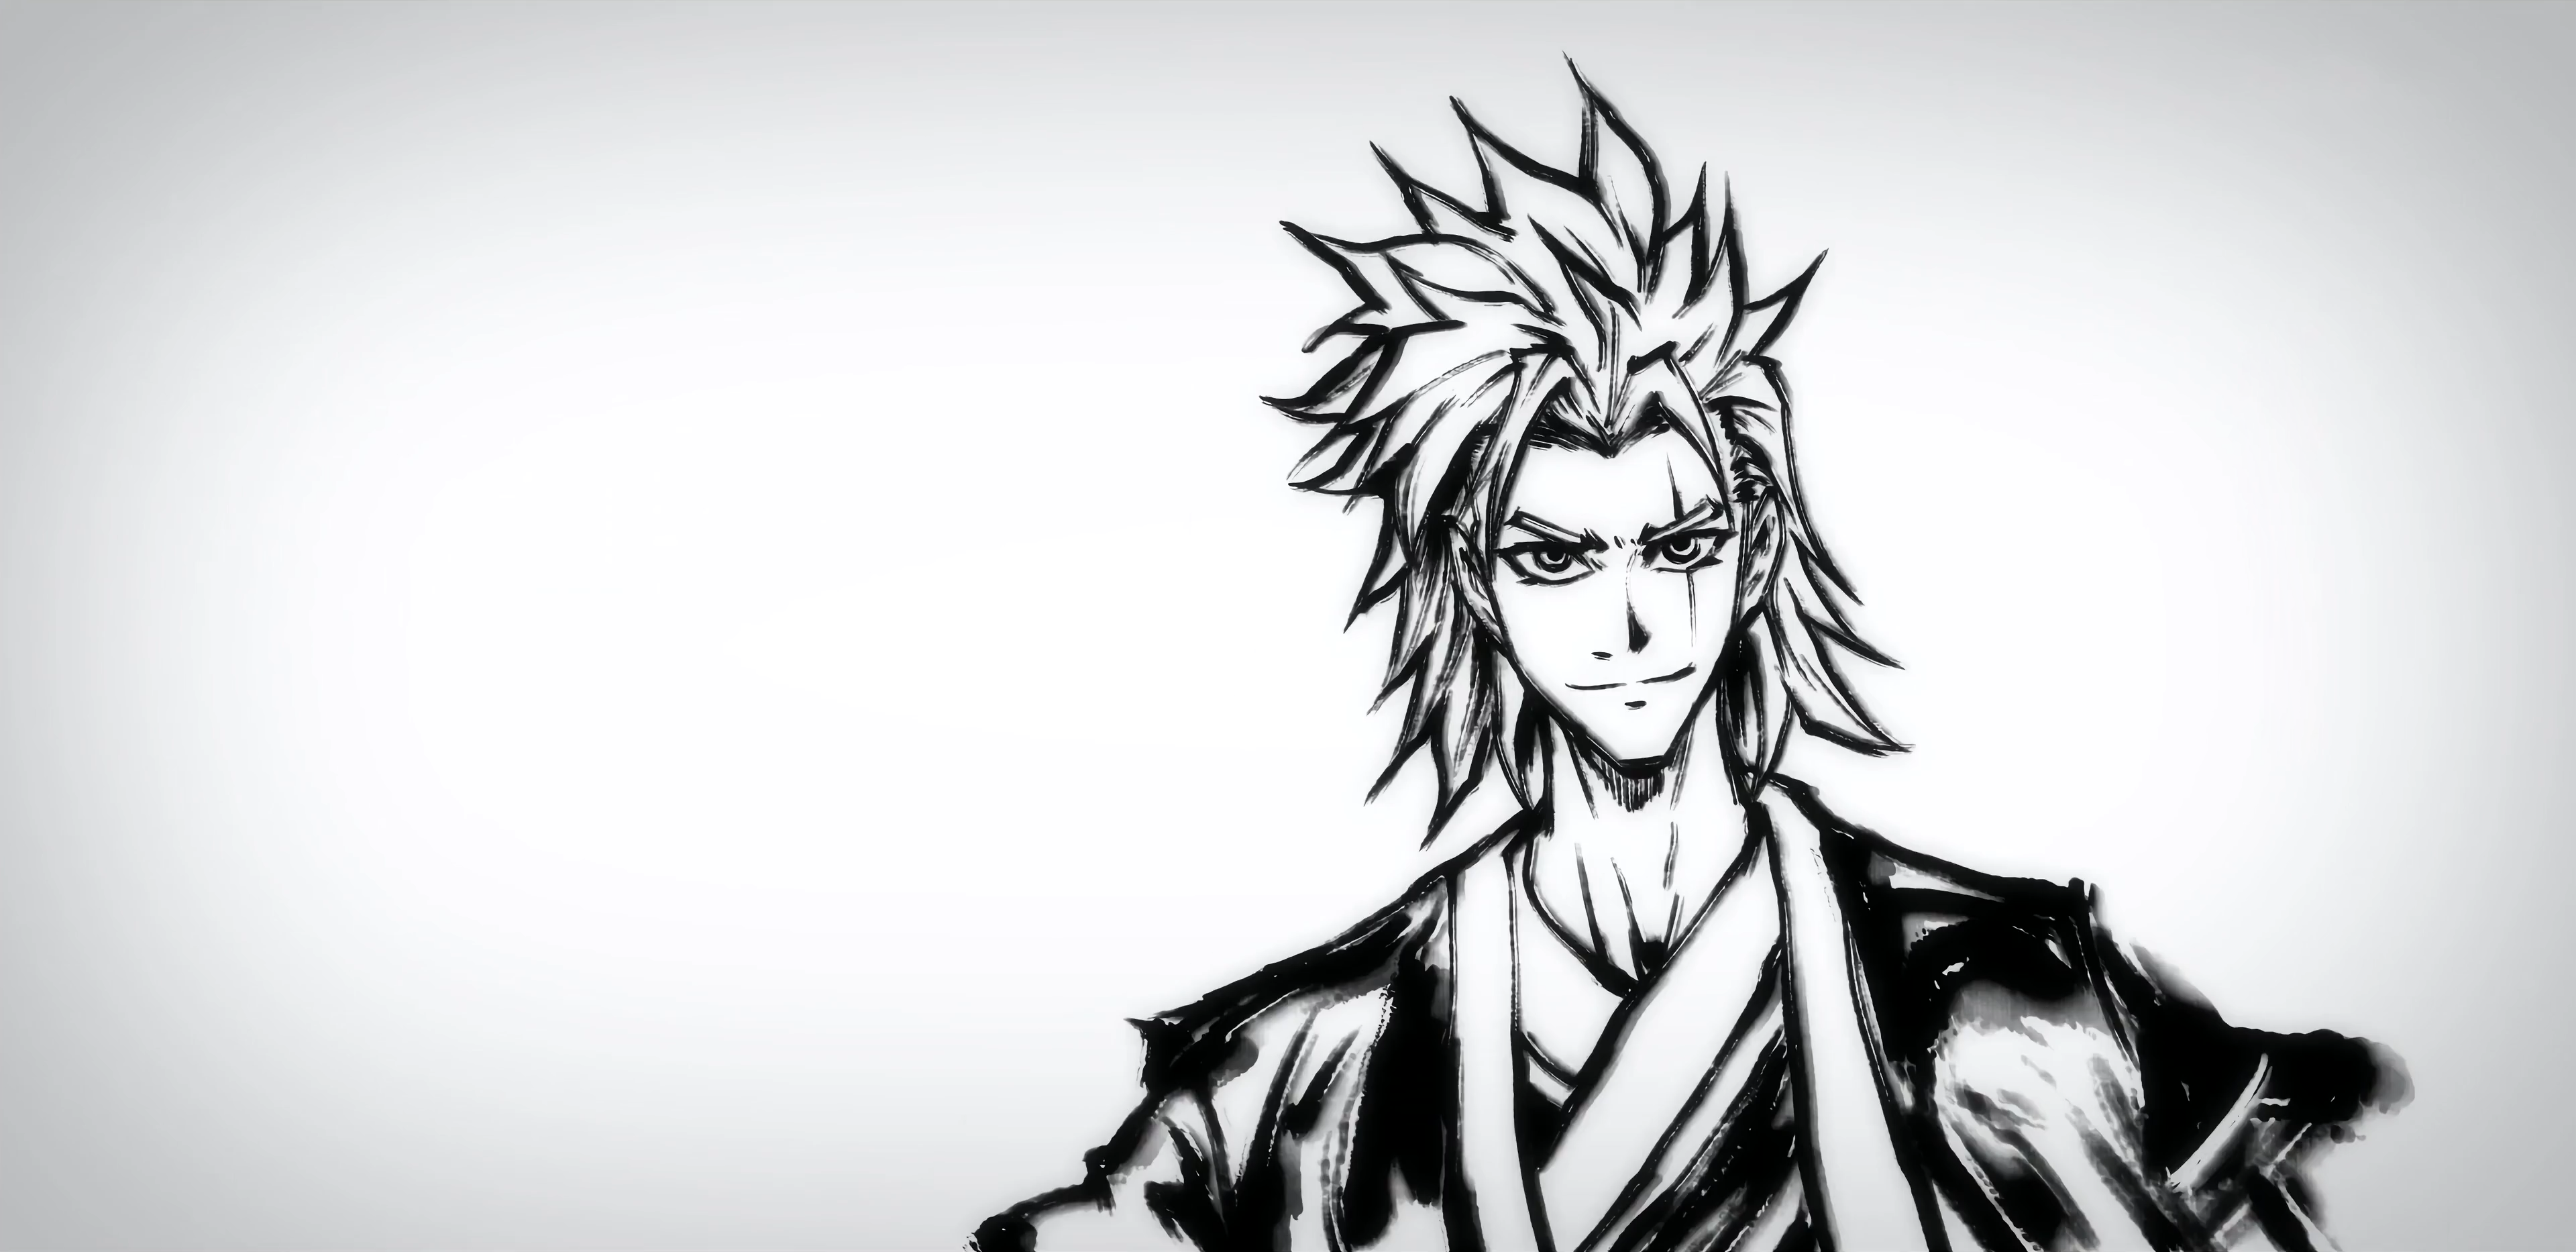 Anime 3840x1866 ChinaGuFeng Wushan five elements men monochrome smiling scars looking at viewer simple background white background minimalism